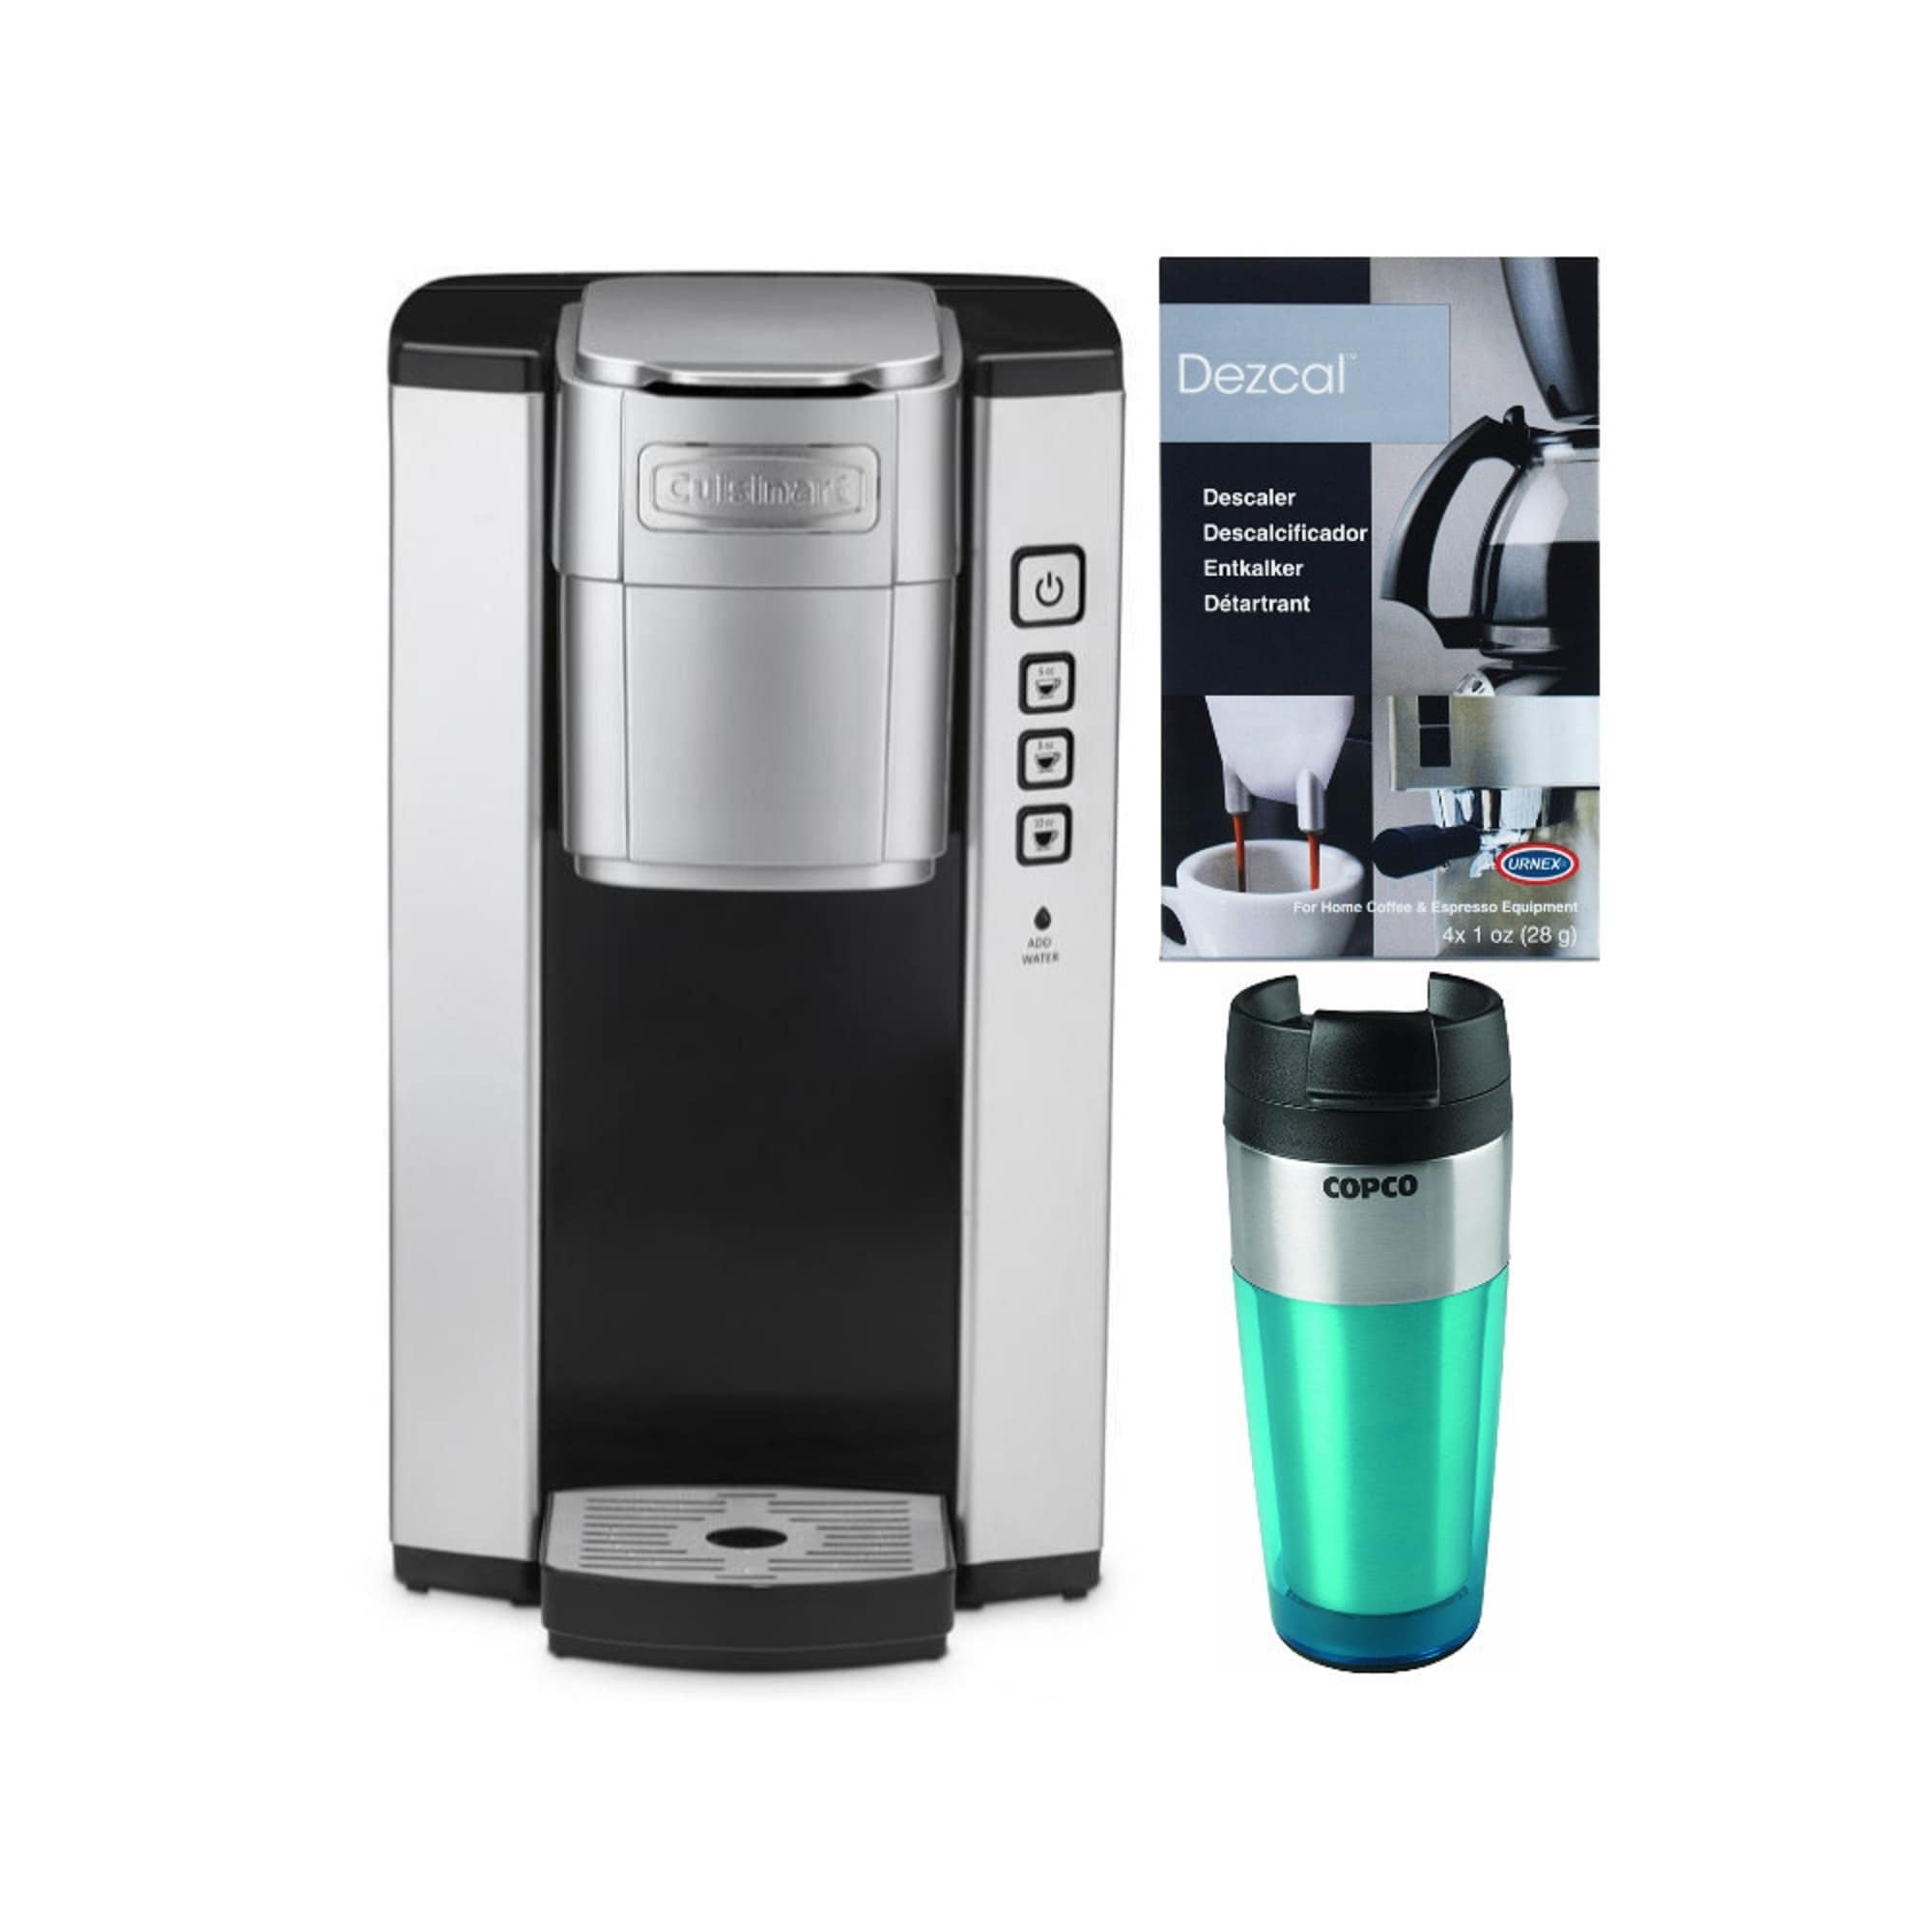 https://ak1.ostkcdn.com/images/products/is/images/direct/f2fba4abb083b35dfd5a290645881387e3777e6f/Cuisinart-SS-5-Compact-Single-Serve-Coffee-Brewer-with-Tumbler-Bundle.jpg